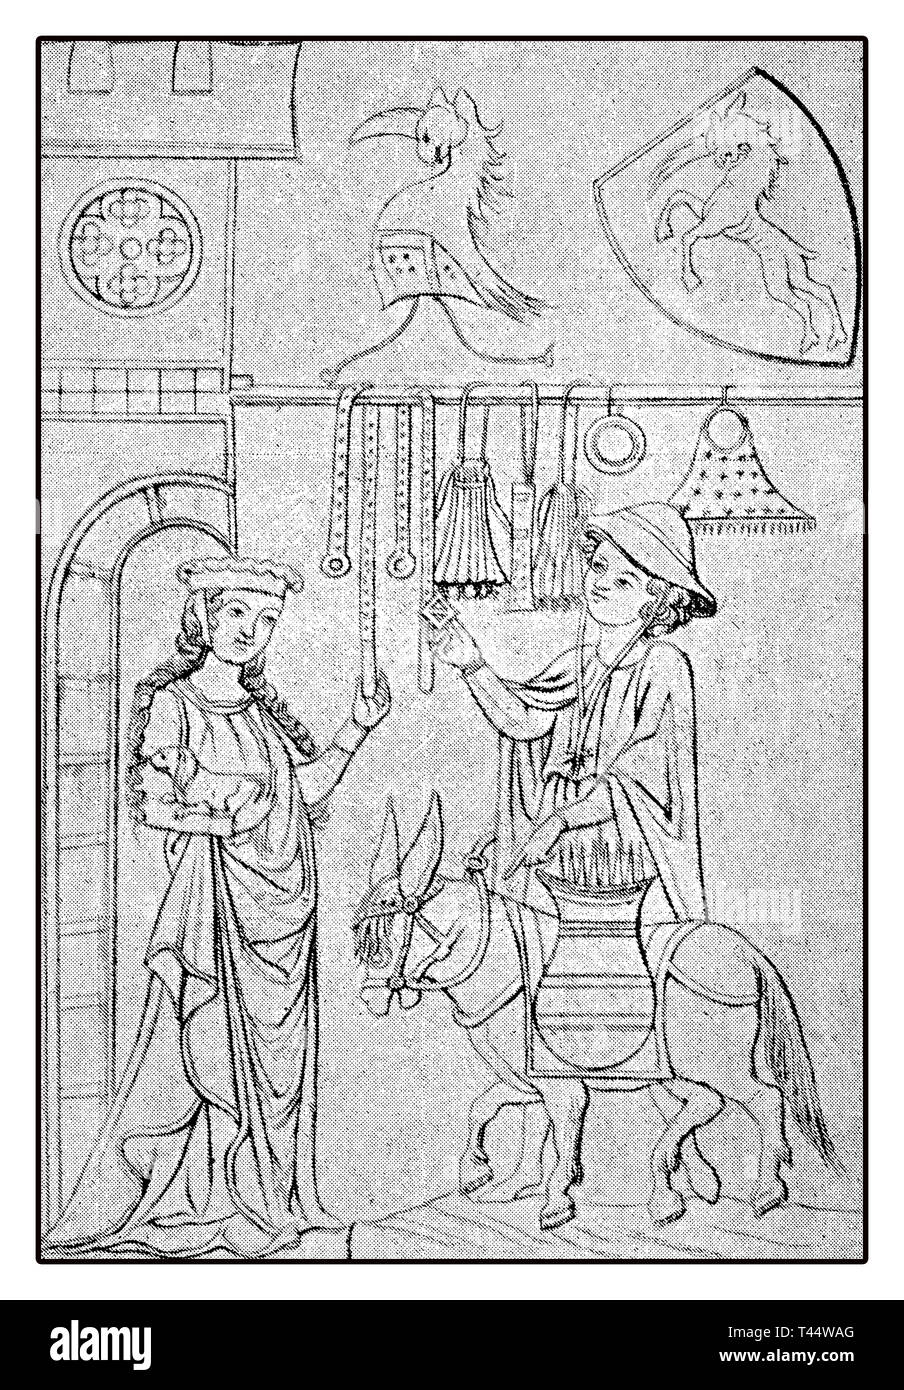 Old drawing describing the Knight courtly love in the Hohenstaufen times, a  dynasty of German kings in the Middle Ages Stock Photo